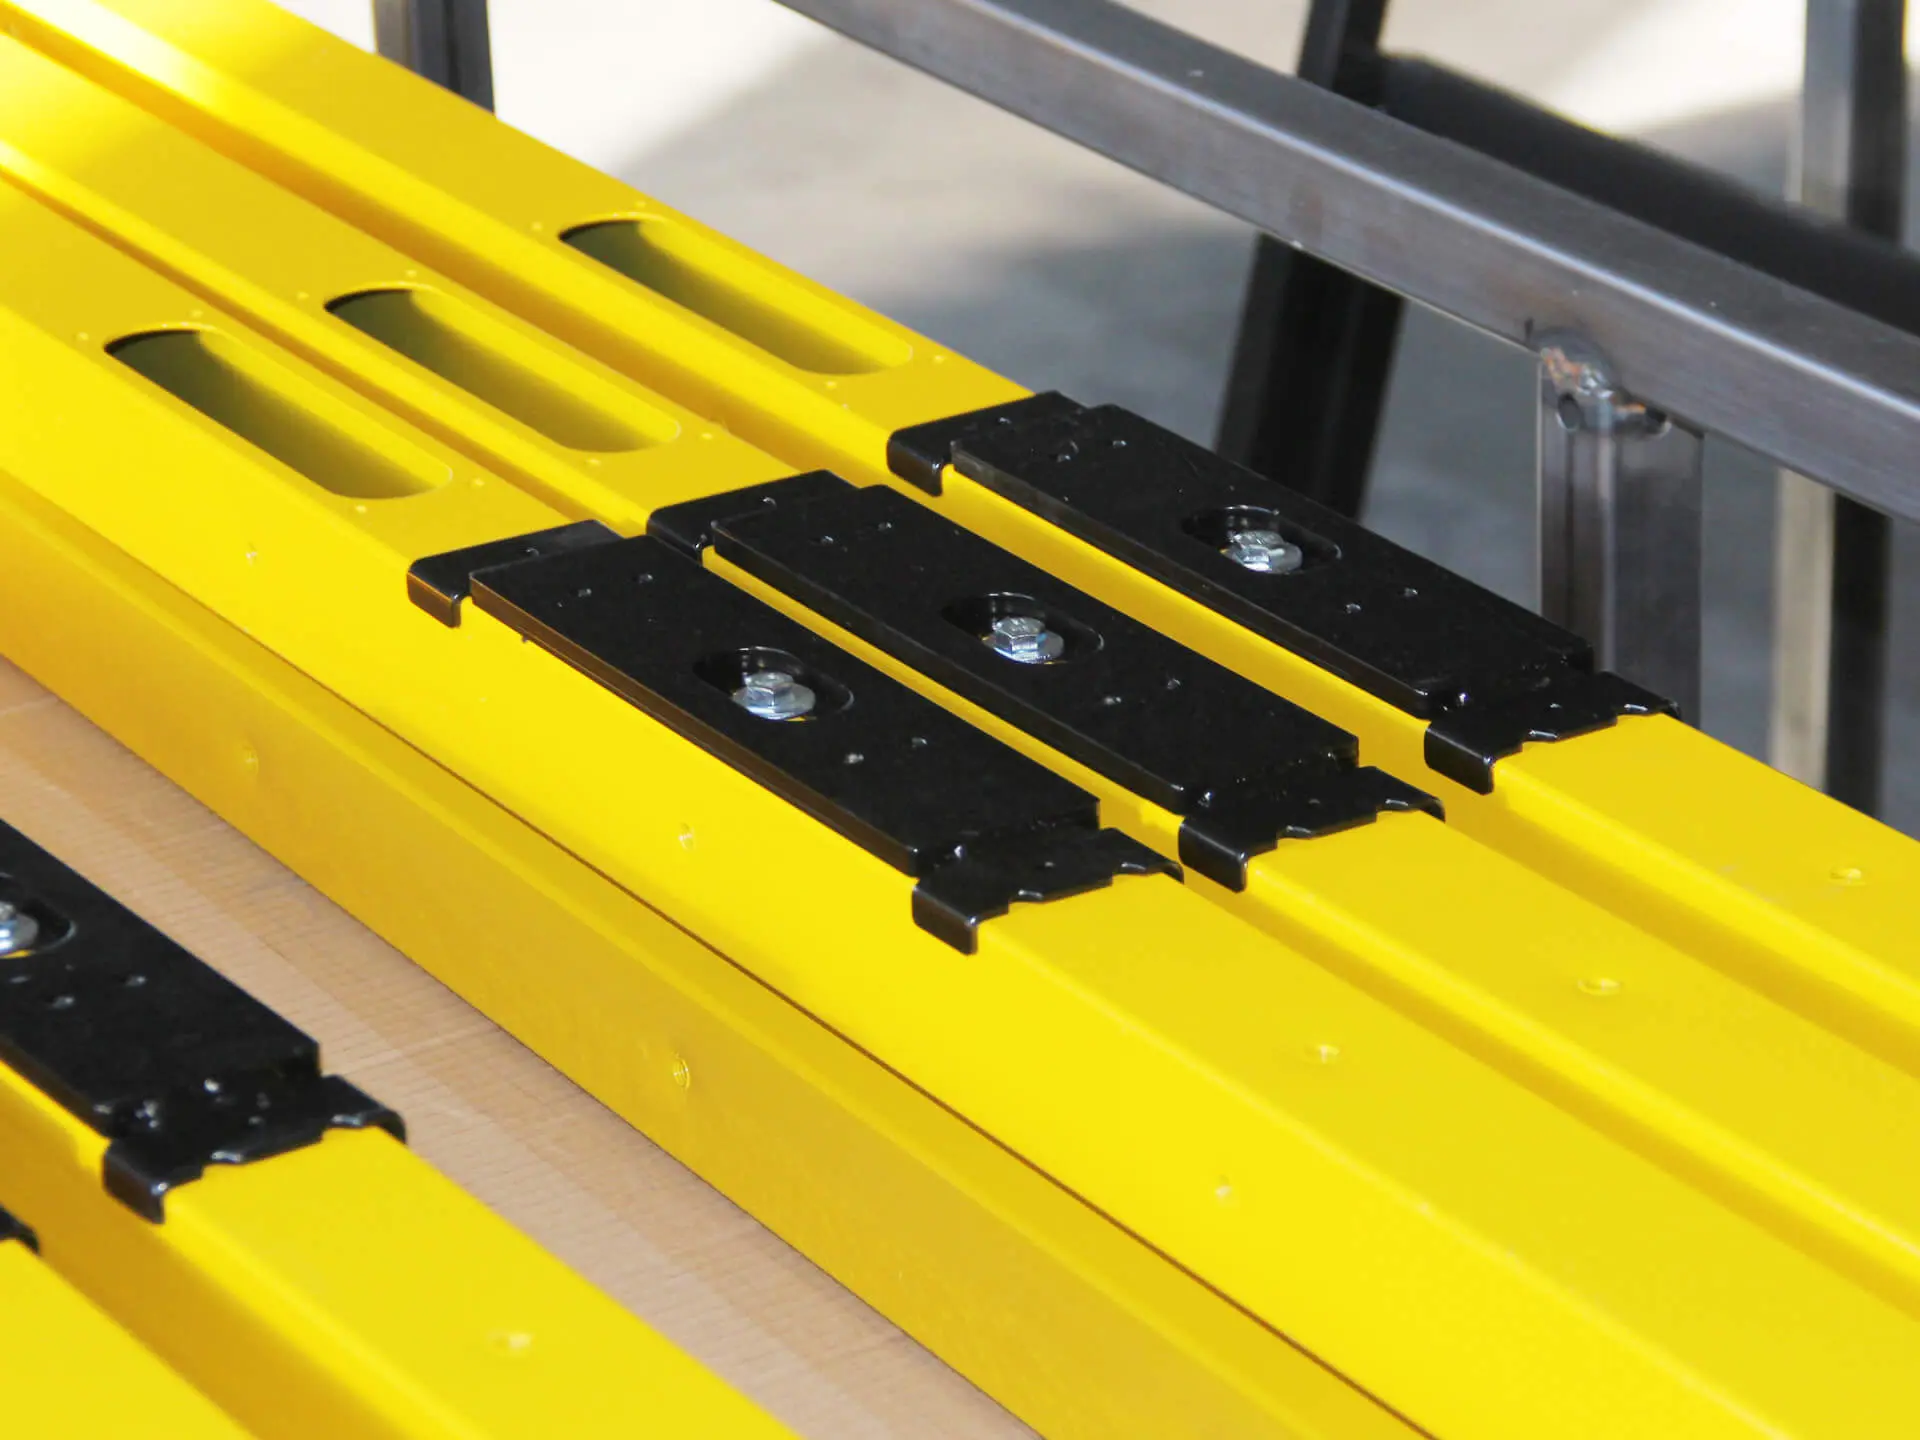 To support the integration of Interlocking Devices into your guards, we offer Laser-cut posts with housings for control panels and electronics, and custom-made brackets.